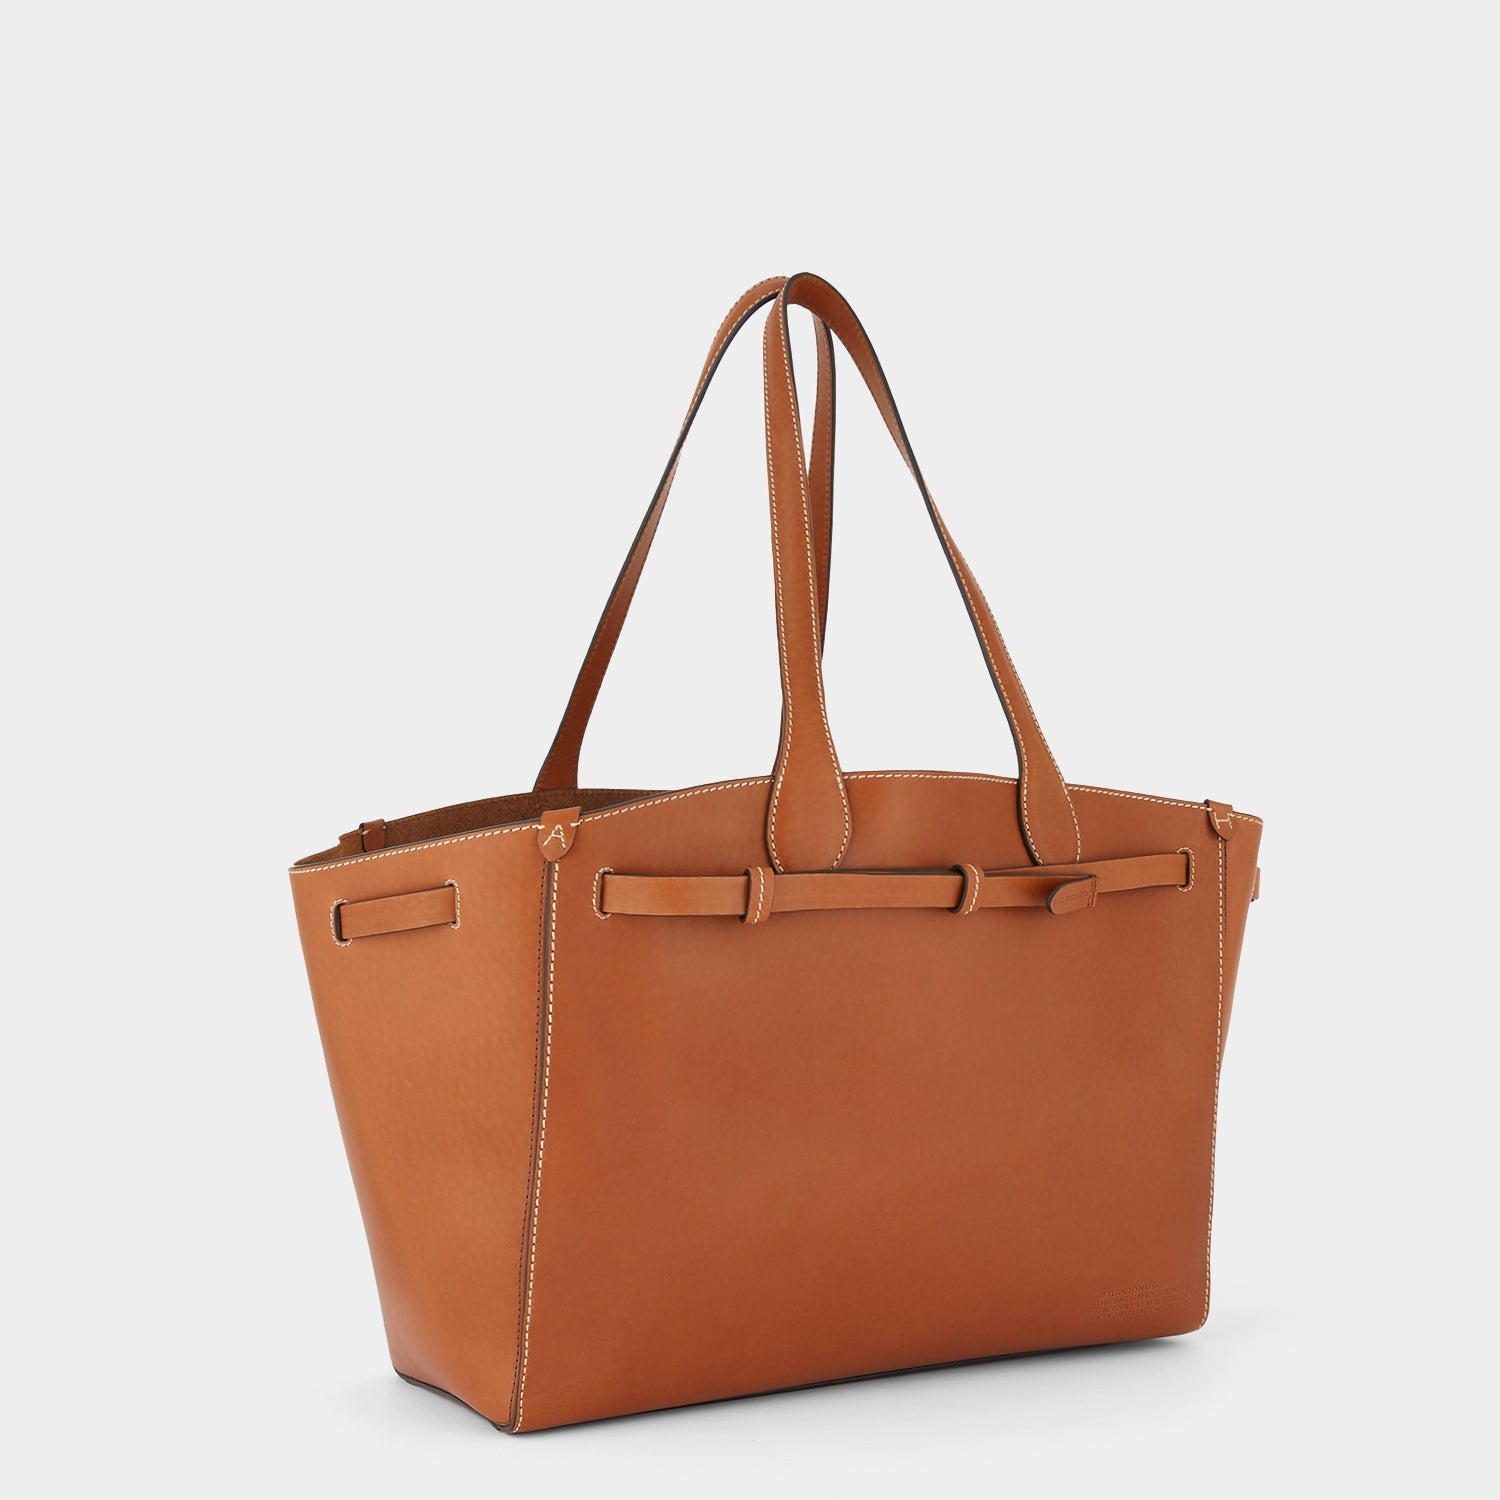 Return to Nature Tote -

                  
                    Compostable Leather in Tan -
                  

                  Anya Hindmarch EU
